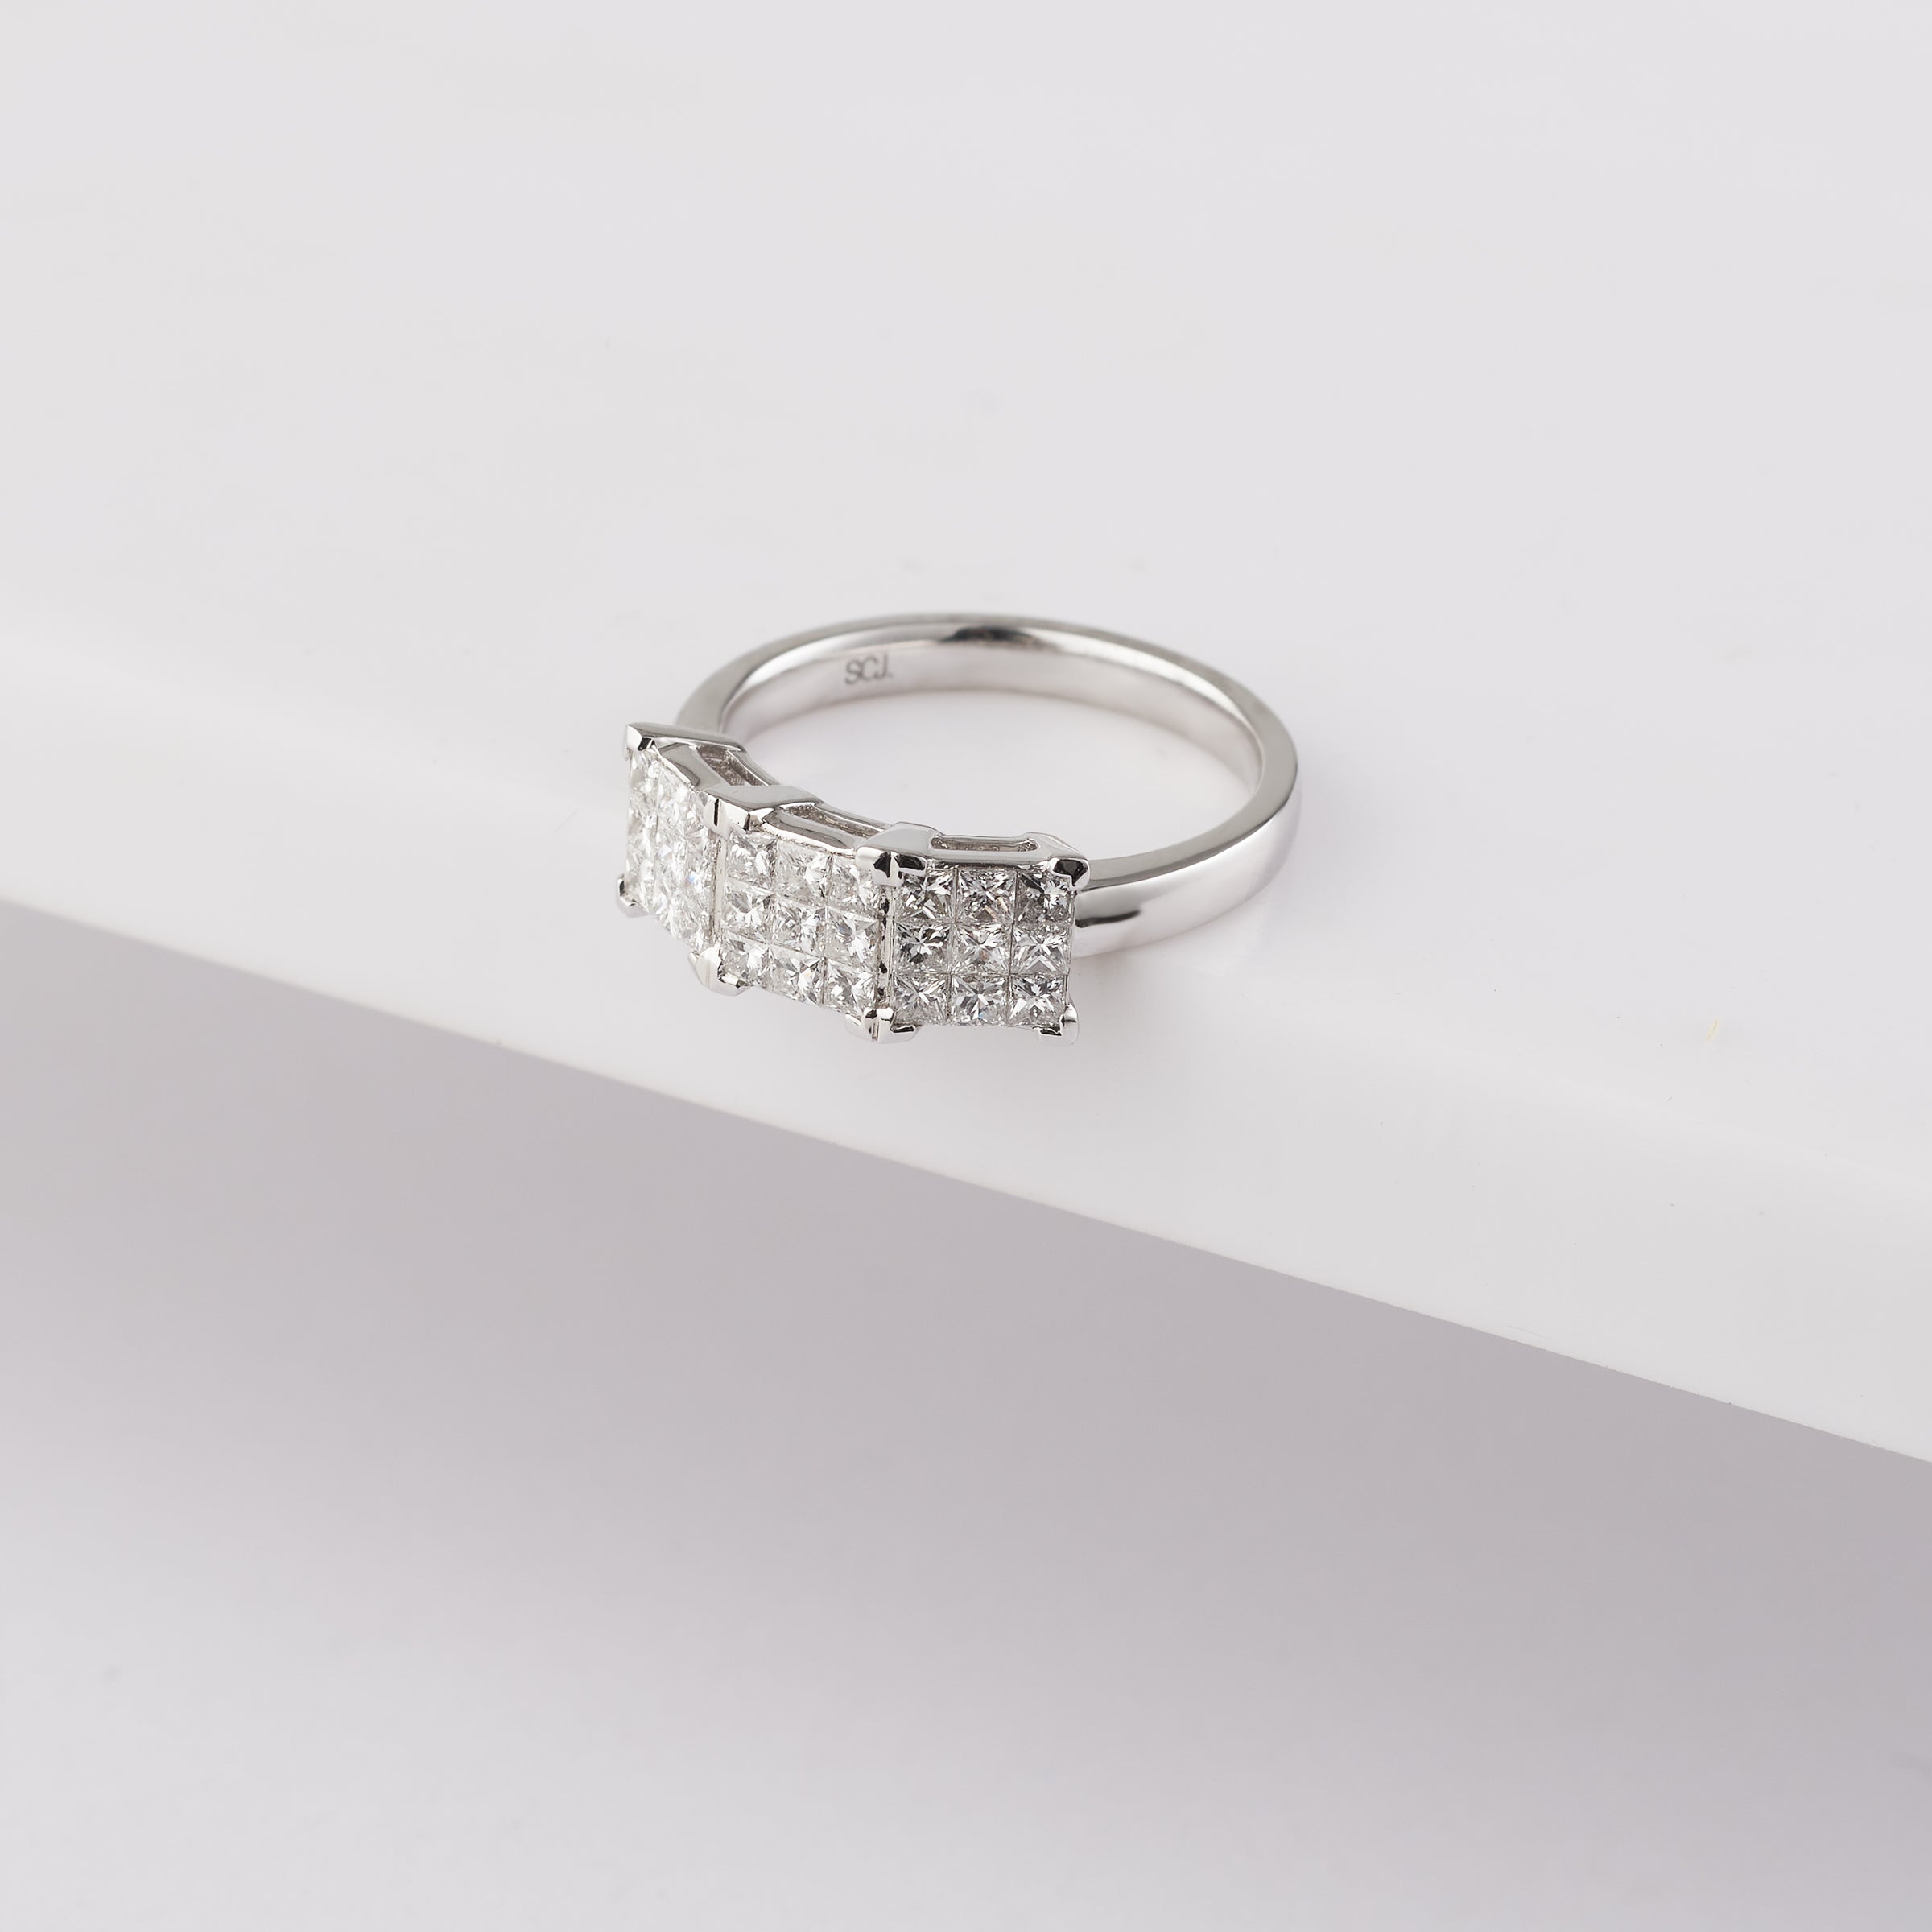 Why Choose Princess Cut Diamond Rings over Others?